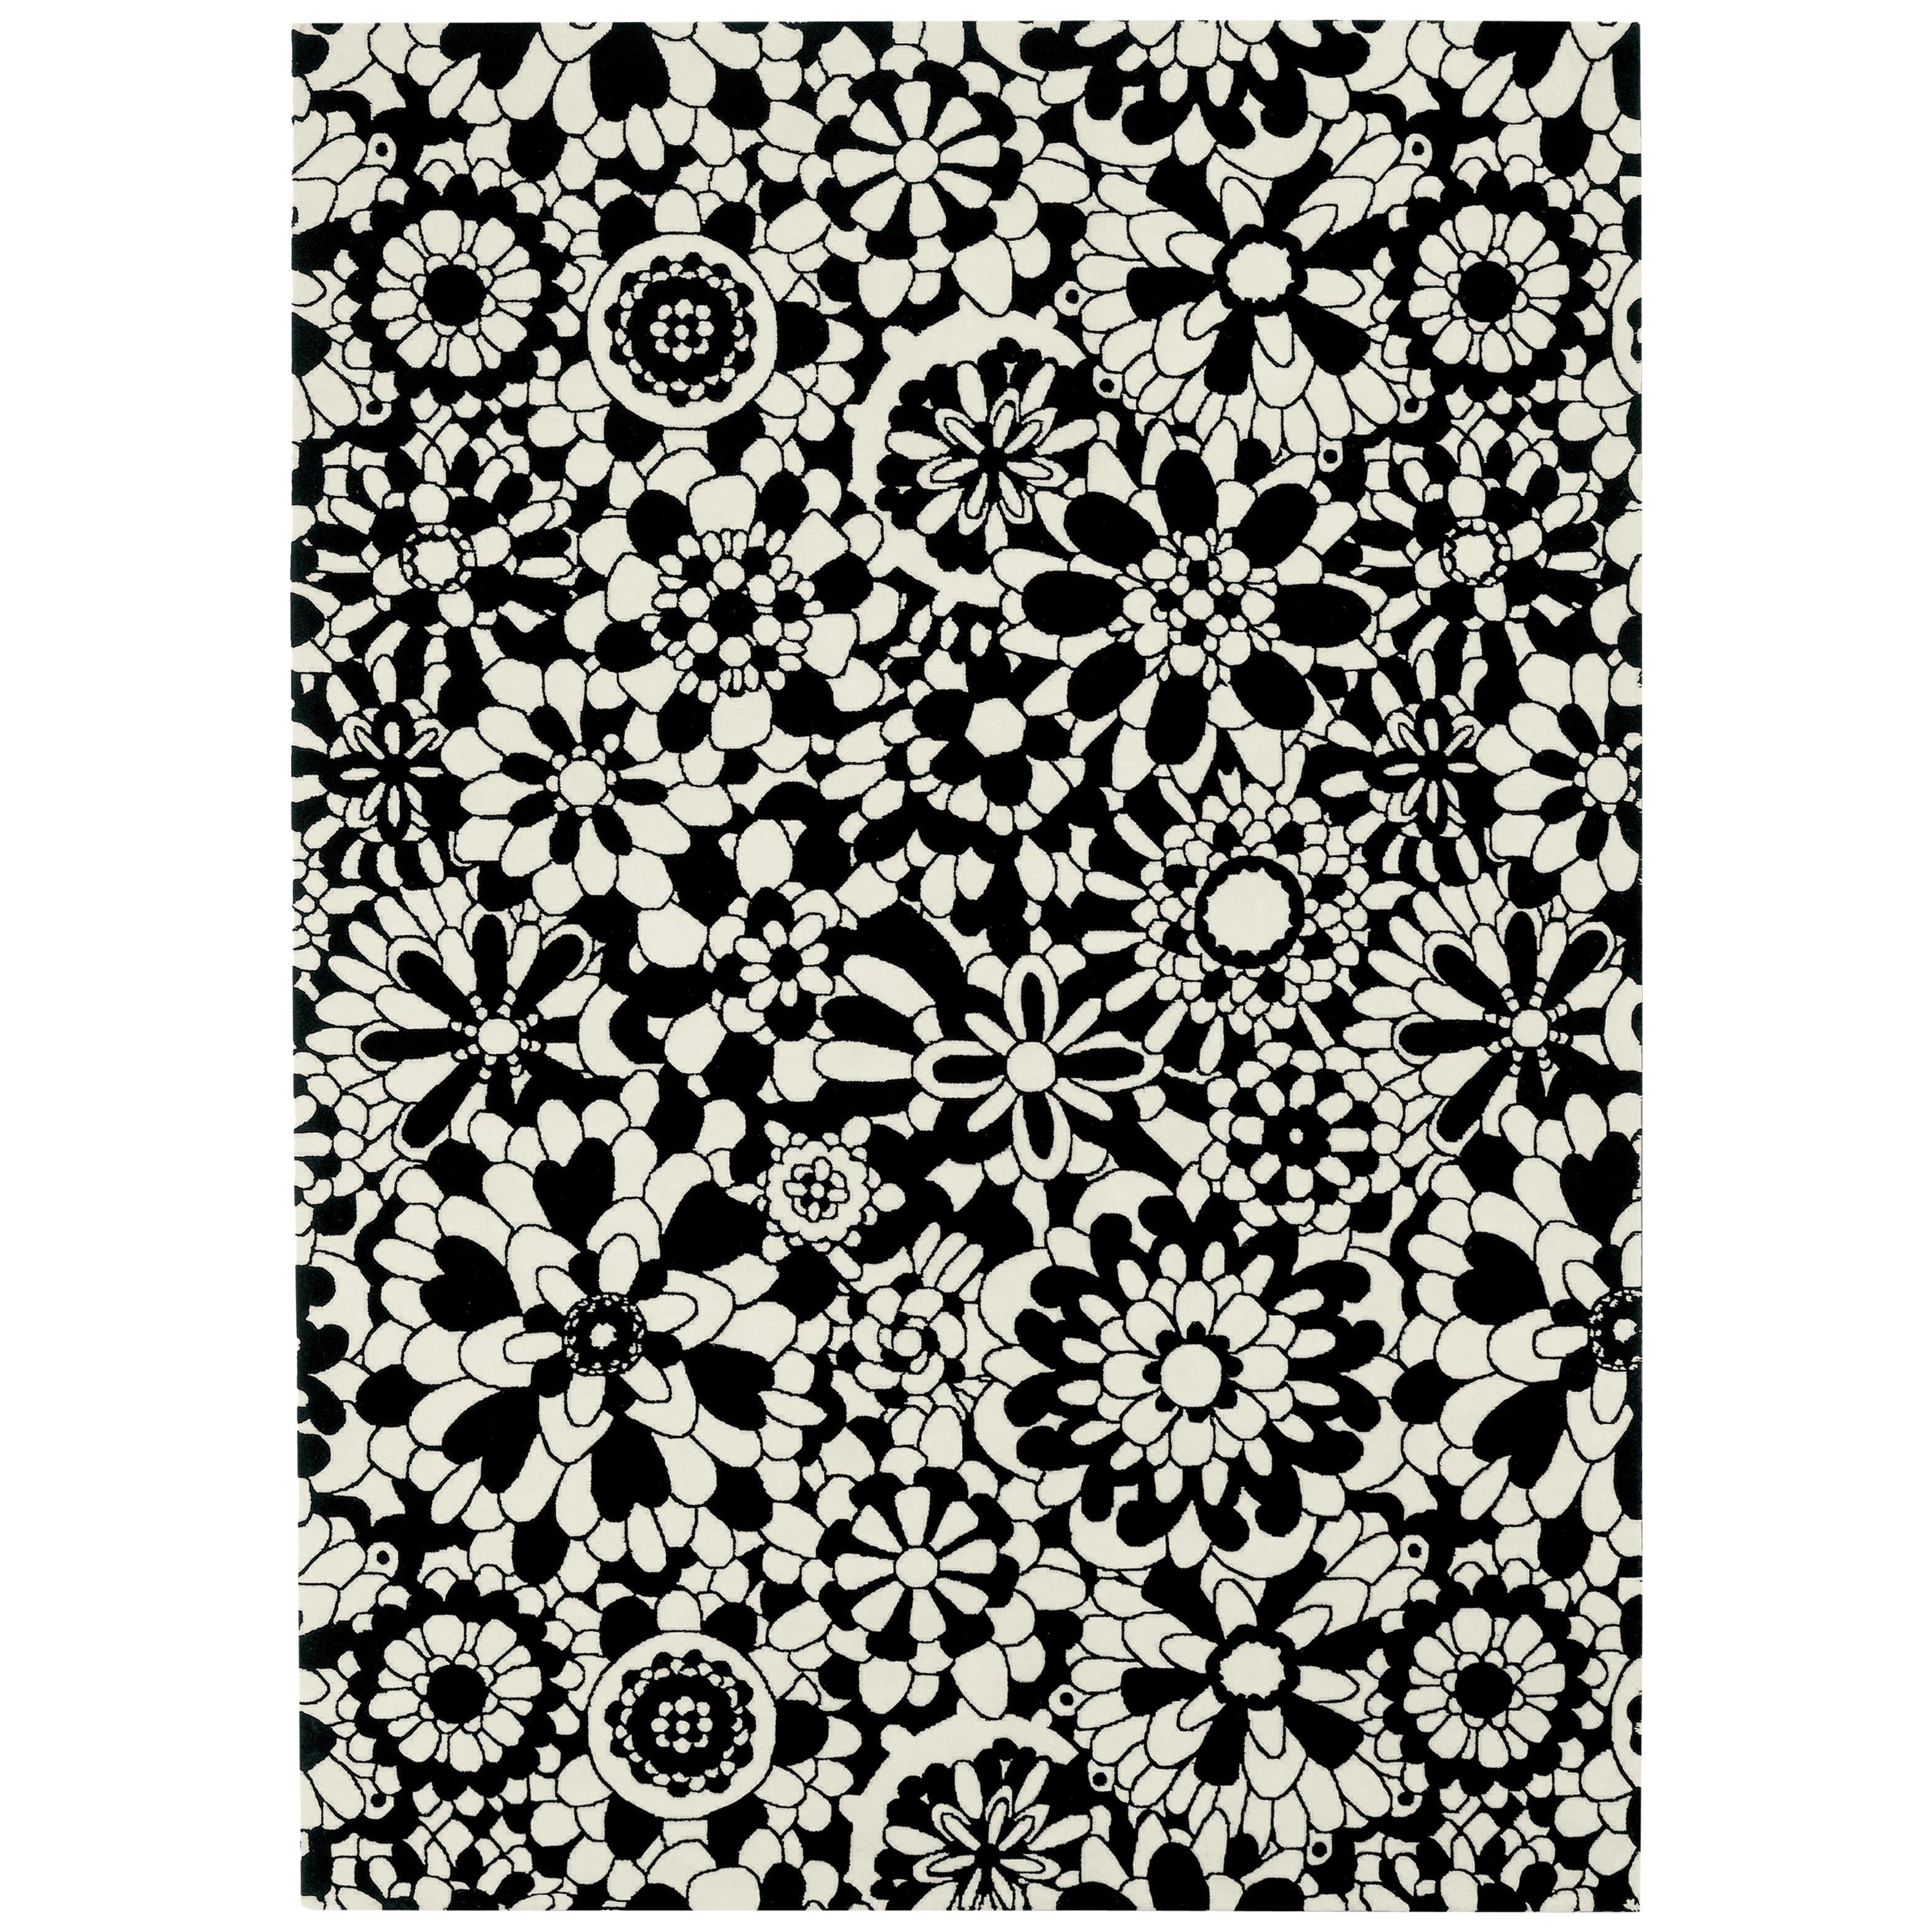 Missoni Home Fleury Wool Rug in Black & White Floral Print For Sale